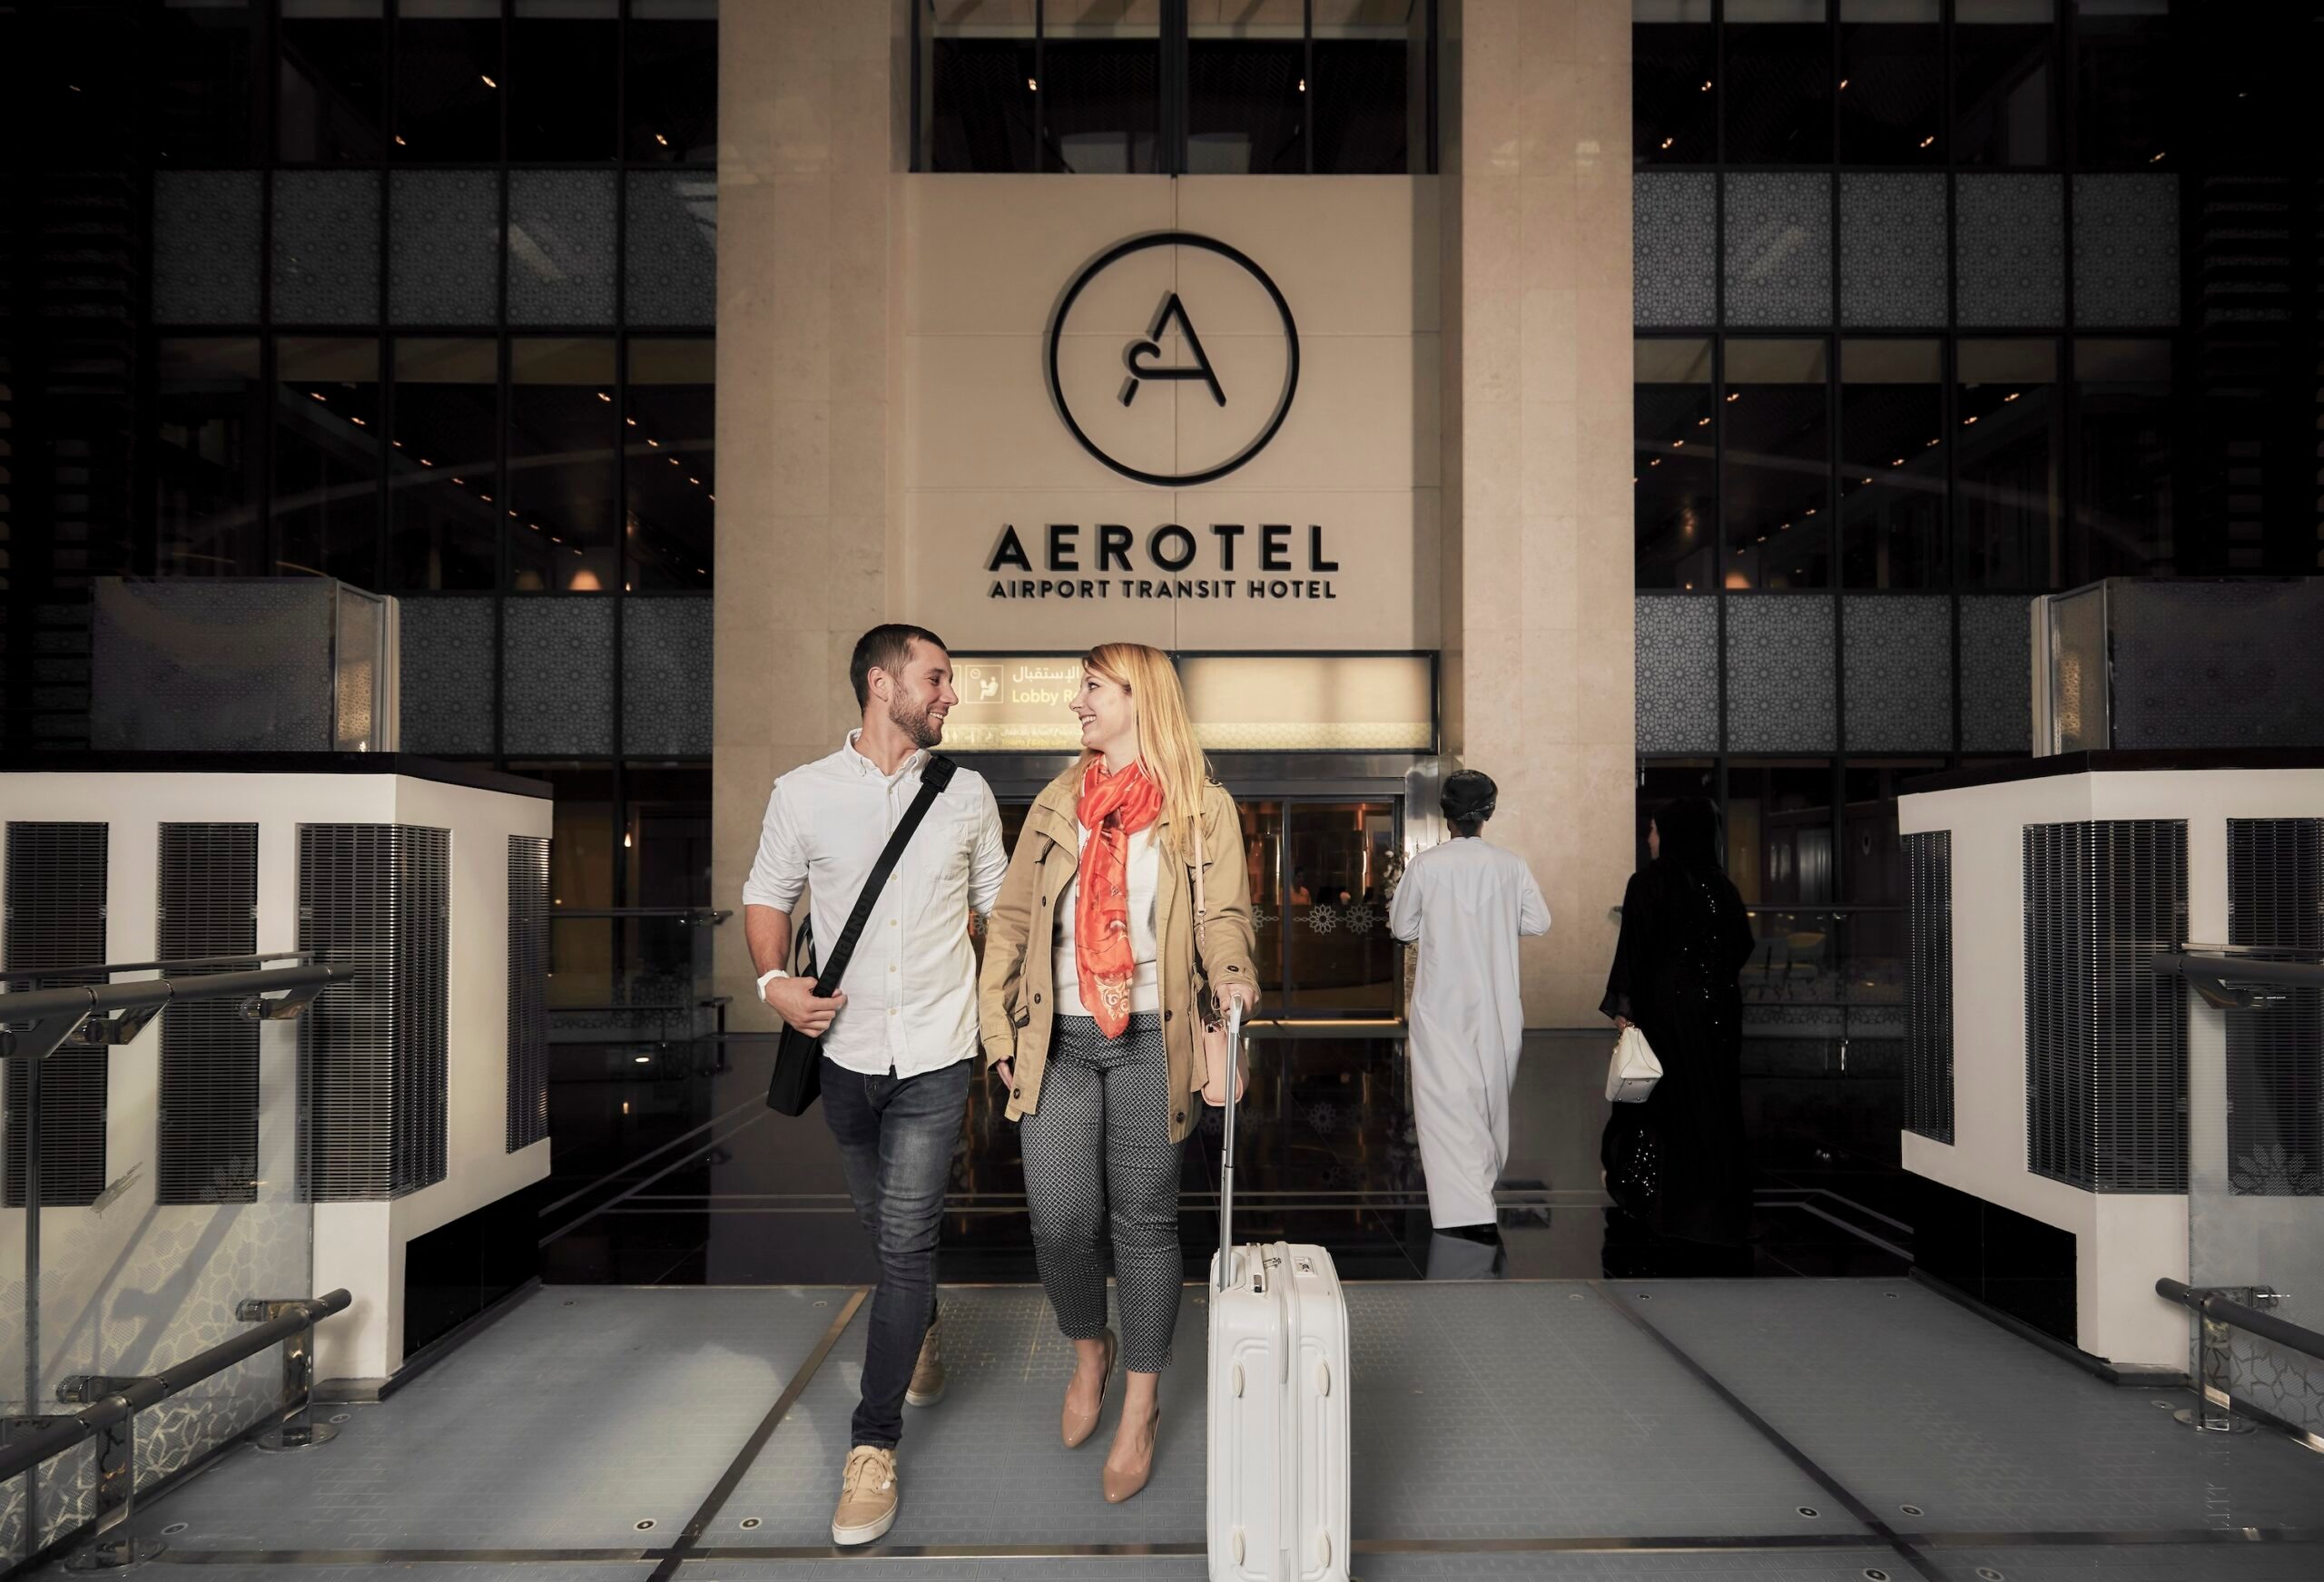 The Aerotels will offer short-stay rooms for travellers